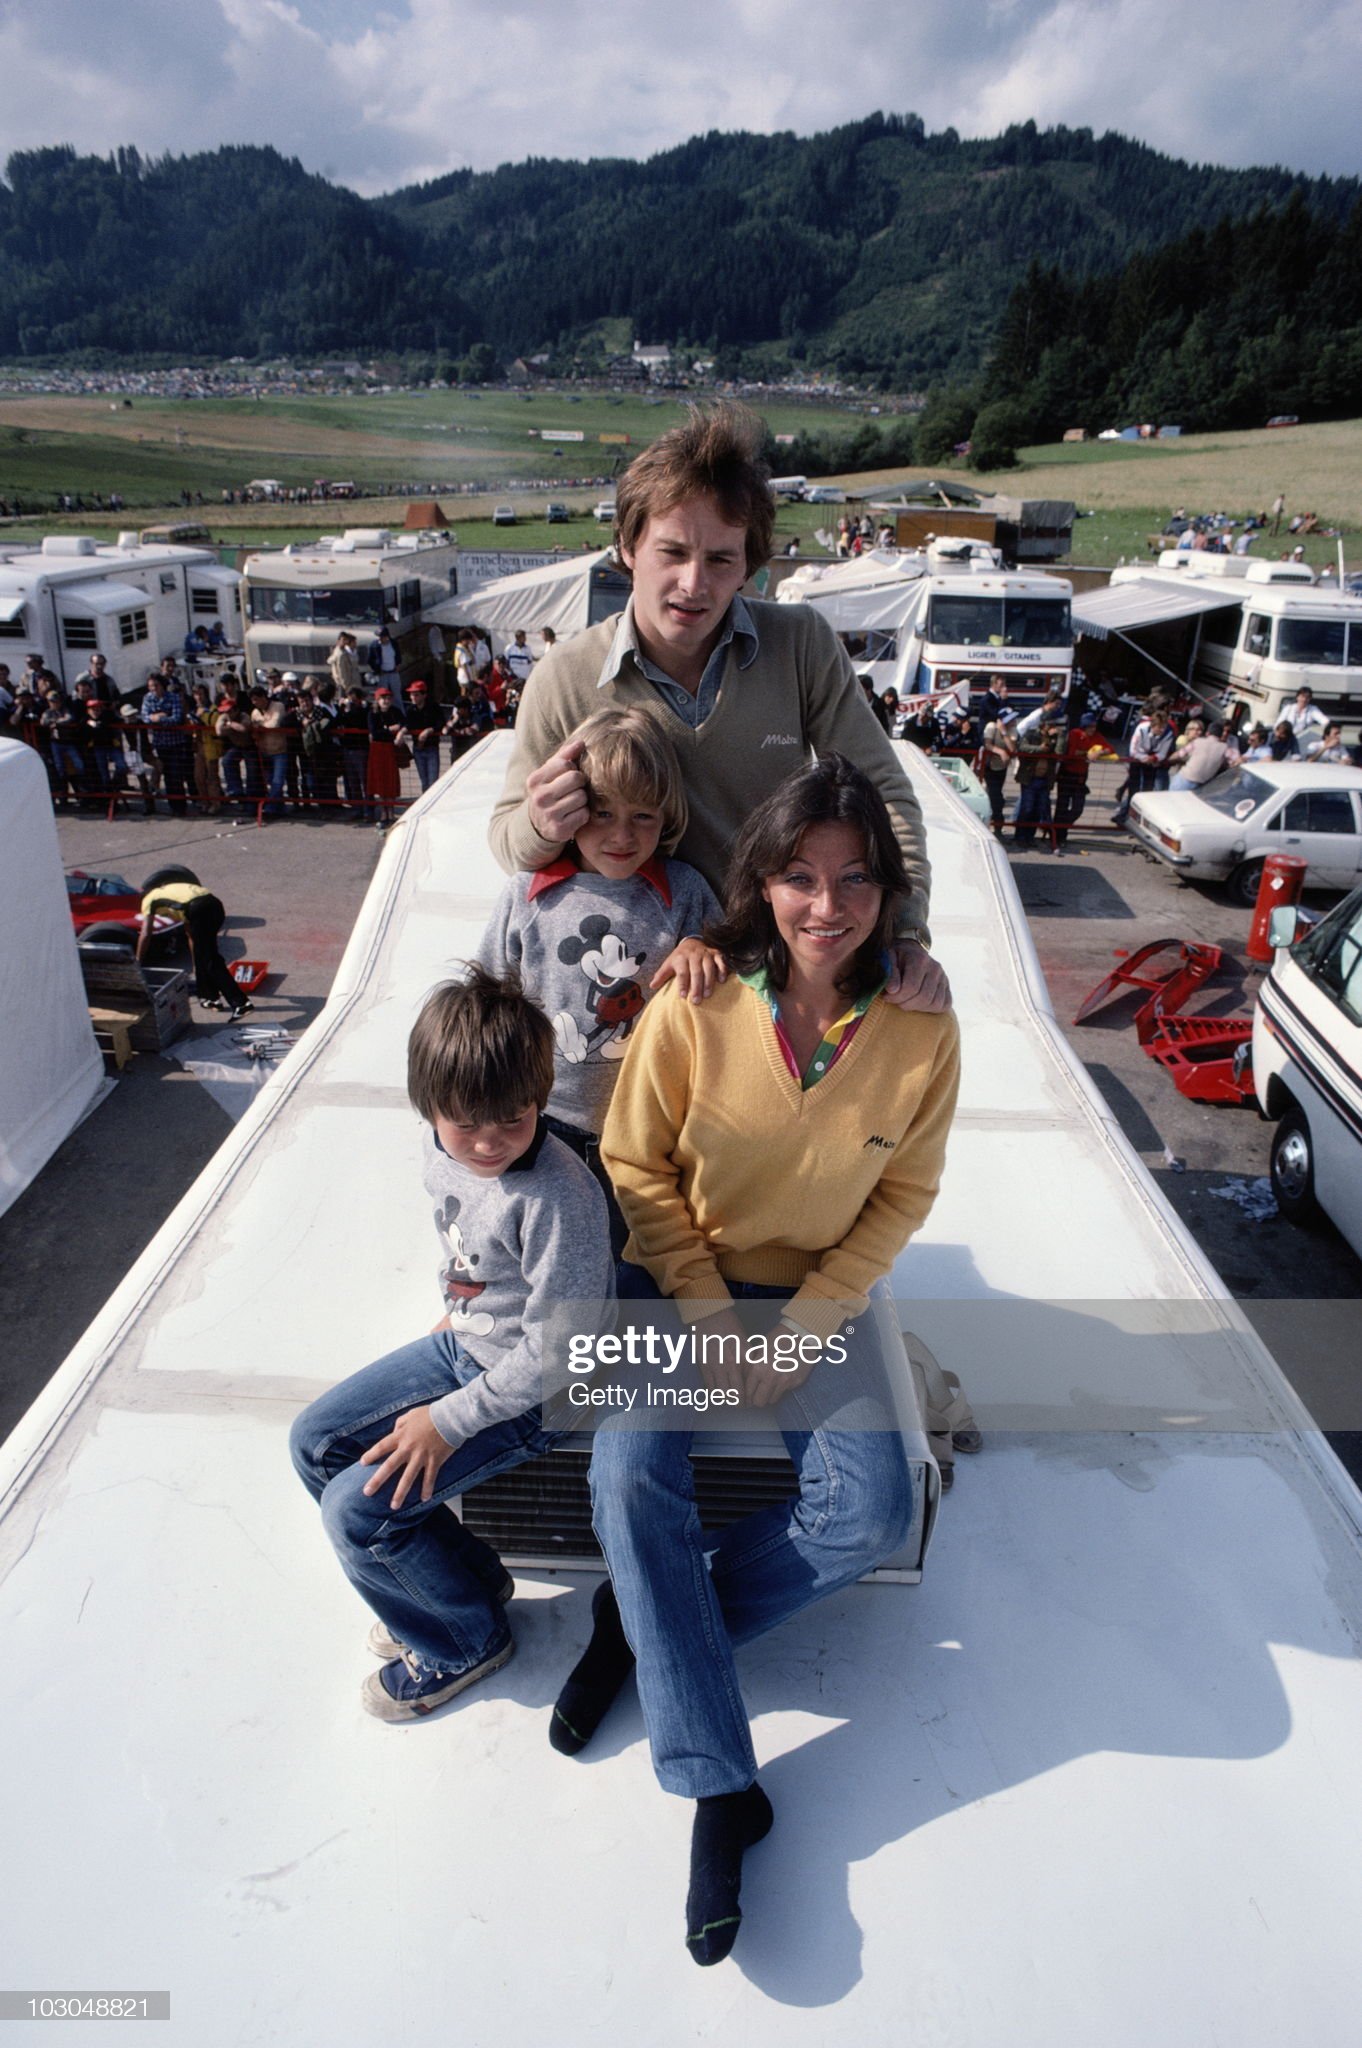 Gilles Villeneuve with his wife Joanne and his two children, Jacques and Melanie.